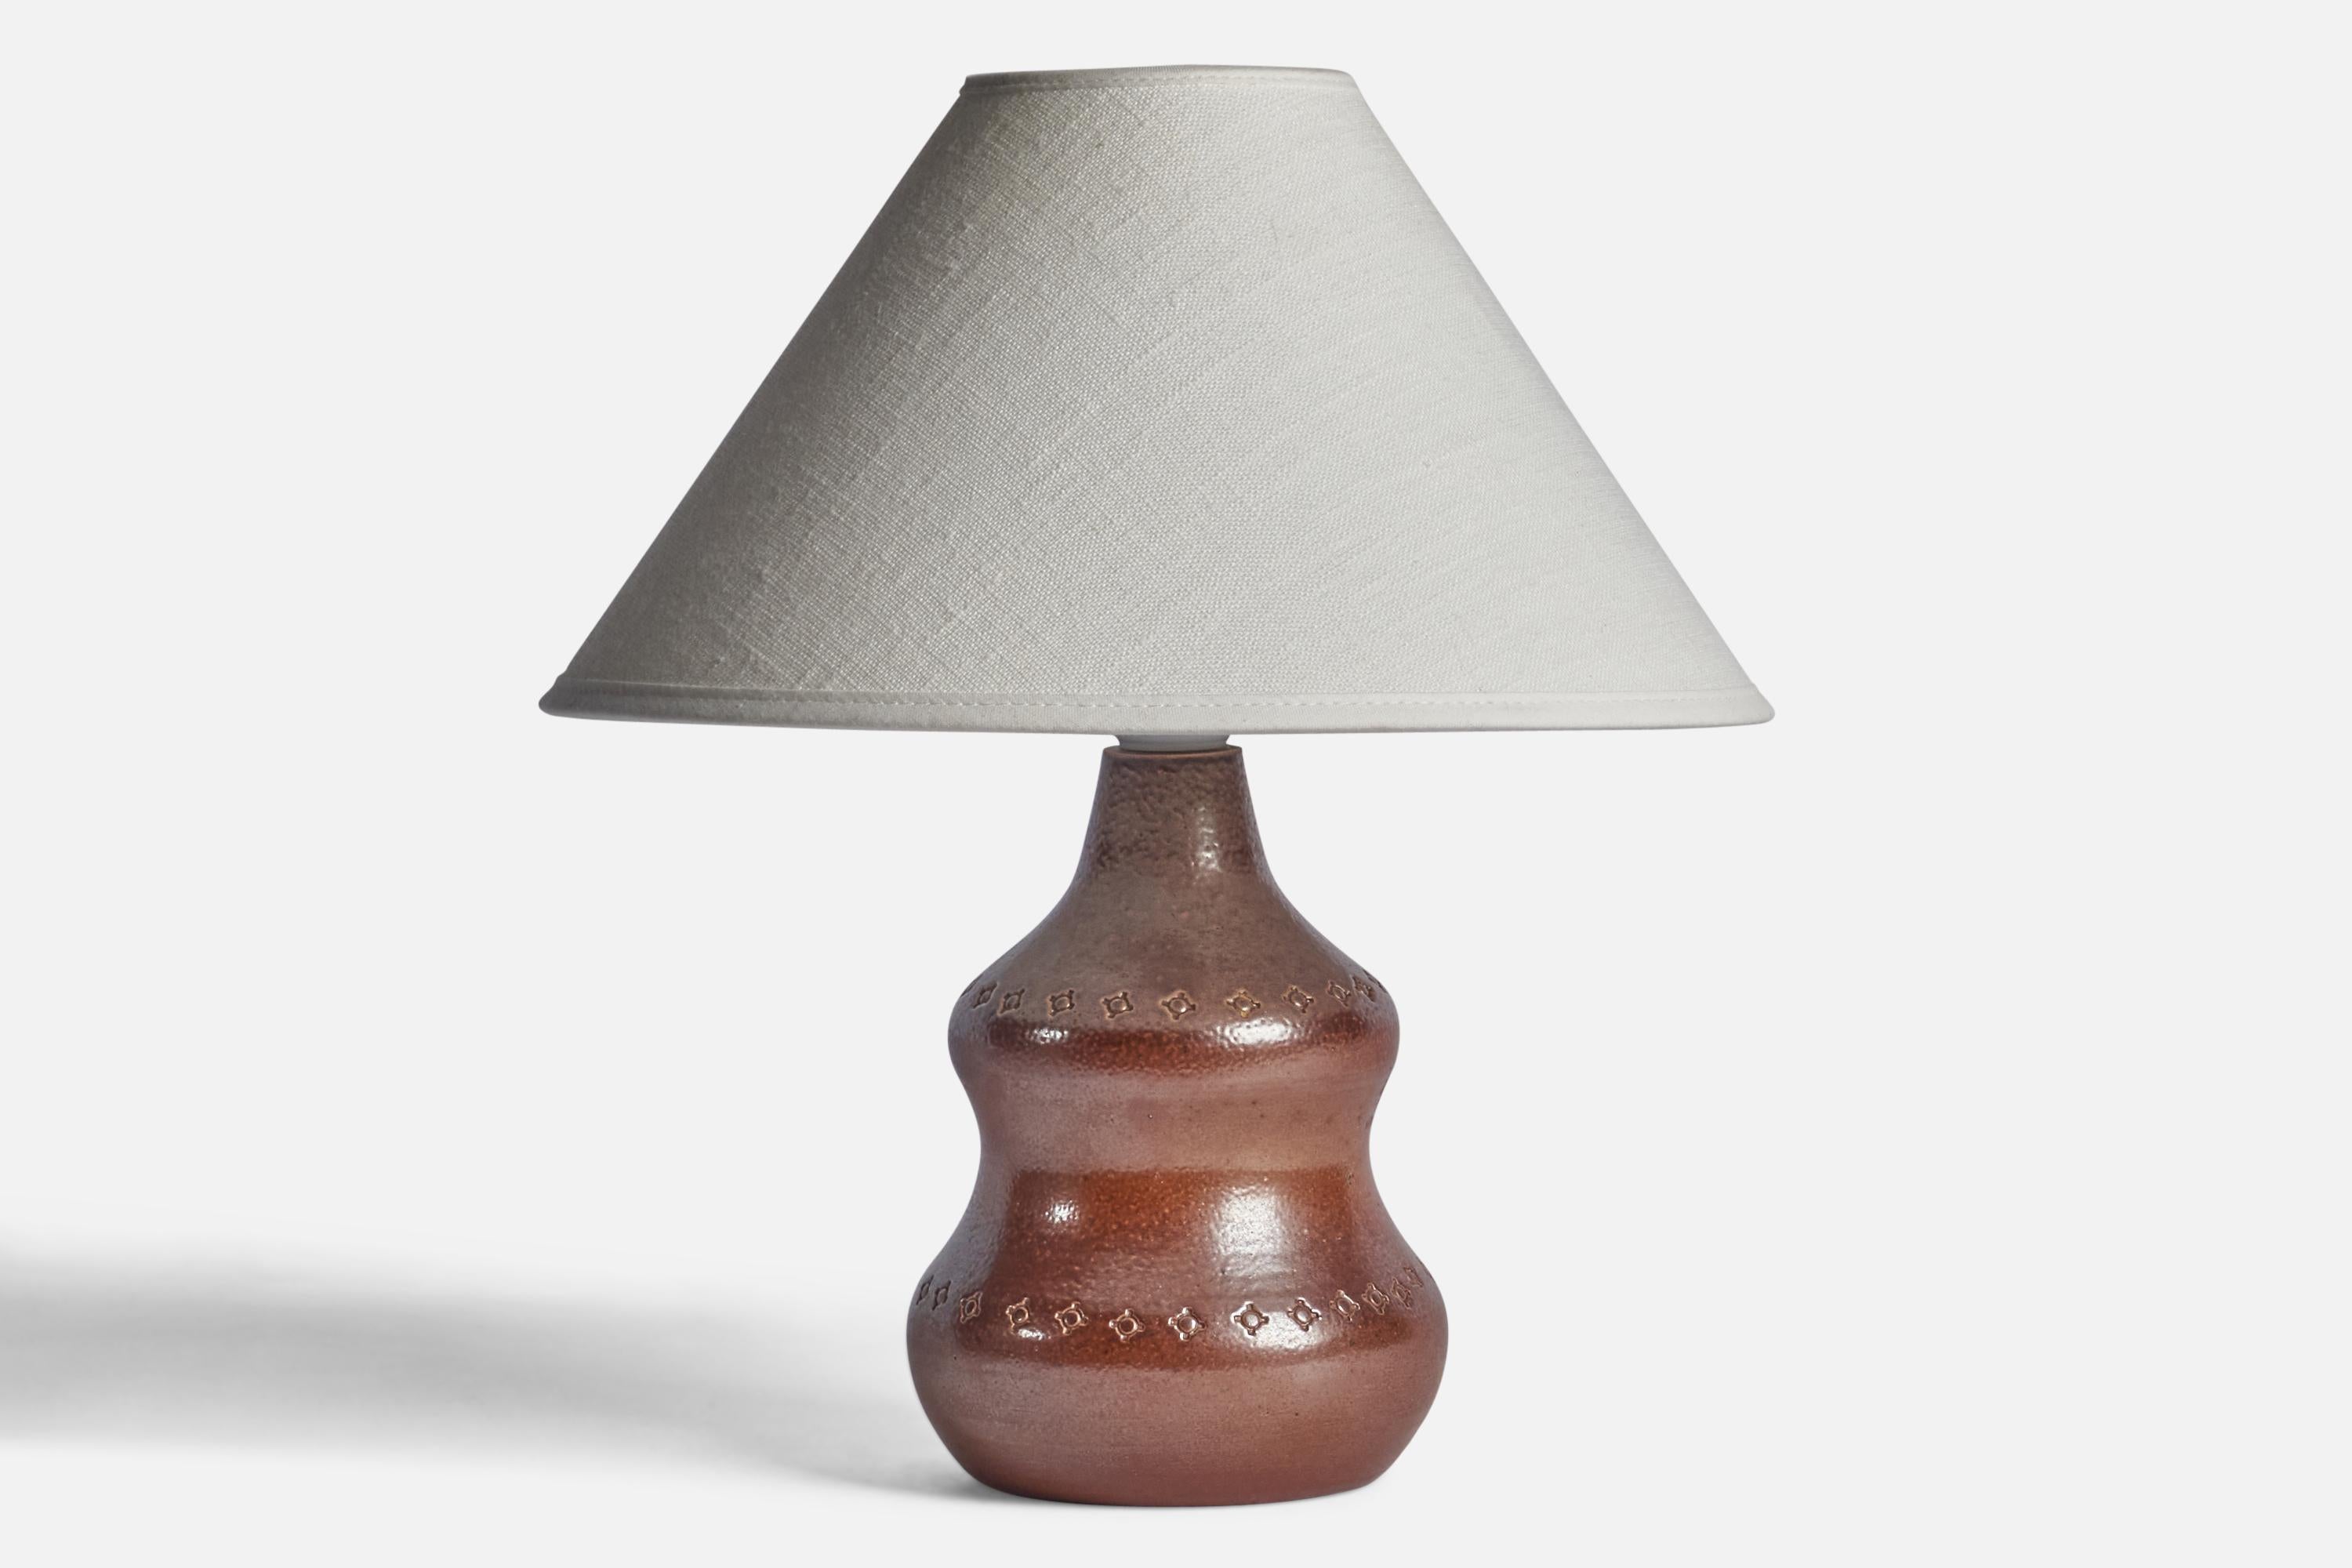 A brown-glazed table lamp designed and produced by Karl Persson, Sweden, 1940s.

Dimensions of Lamp (inches): 8.15” H x 4.5” Diameter
Dimensions of Shade (inches): 2.5” Top Diameter x 10” Bottom Diameter x 5.5